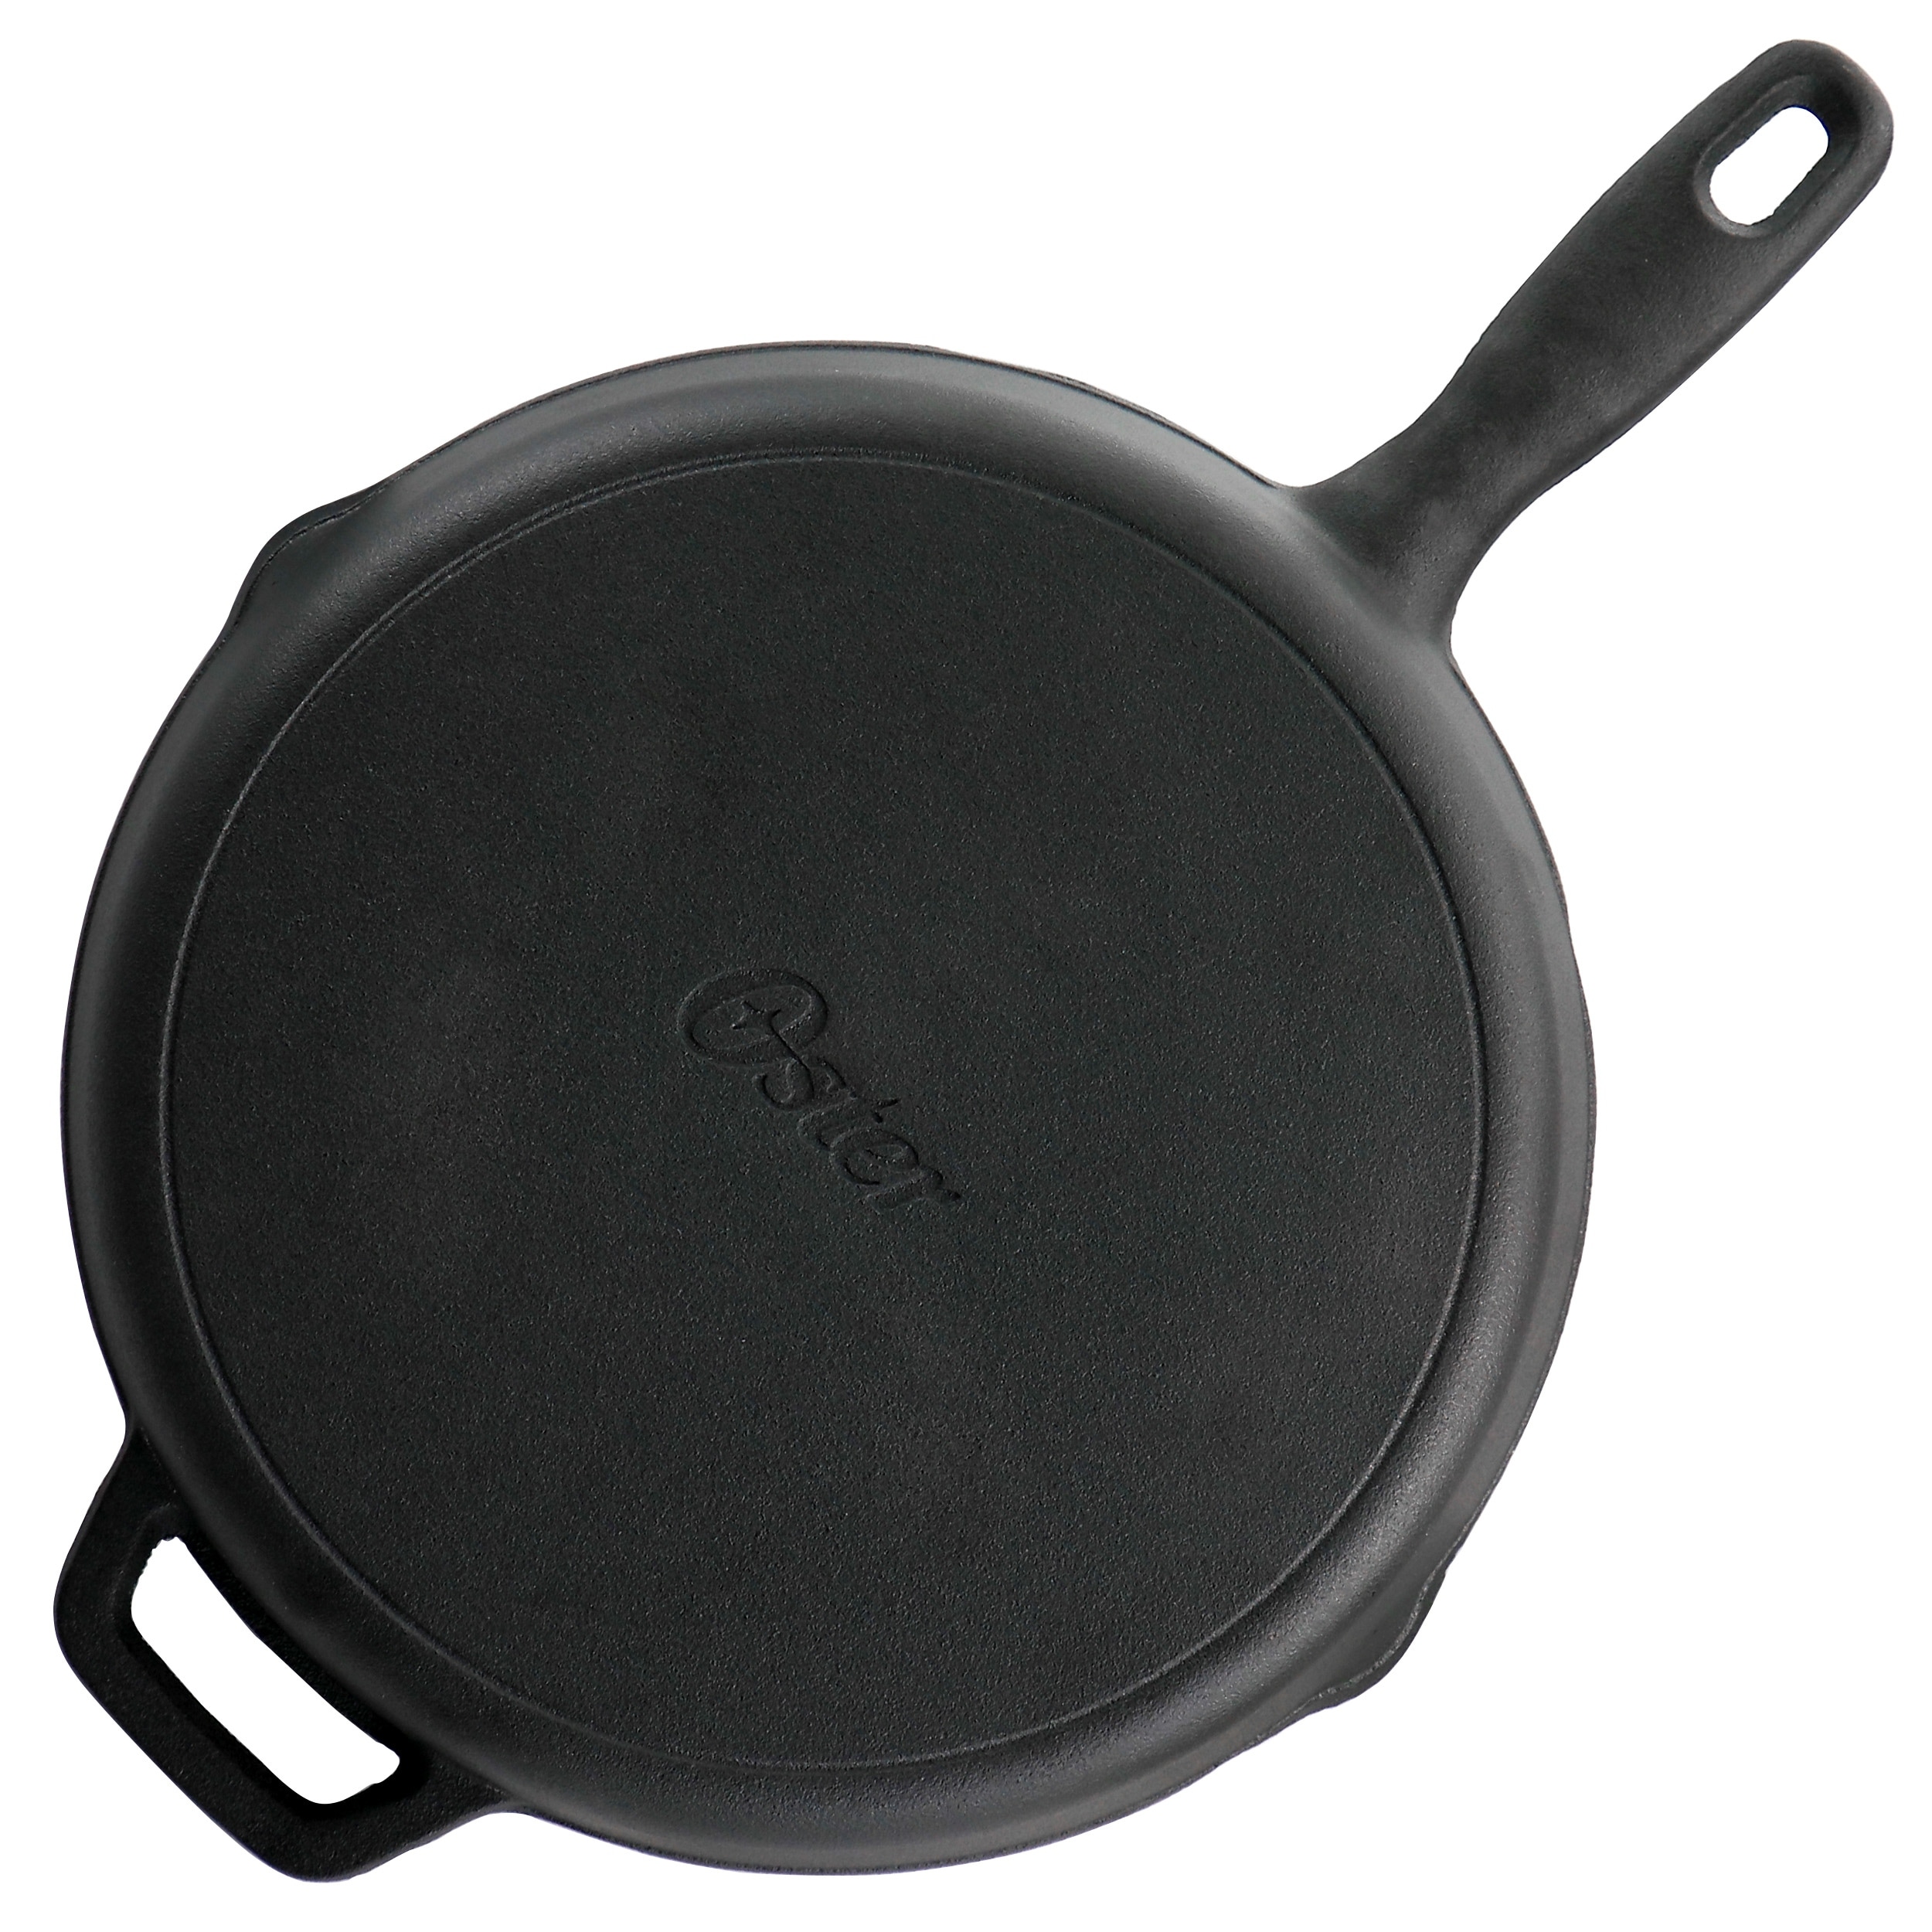 https://ak1.ostkcdn.com/images/products/is/images/direct/d307bdae894cc7b2856577f04de687527ac37e3c/Oster-Castaway-12-Inch-Cast-Iron-Round-Frying-Pan-with-Dual-Spouts.jpg